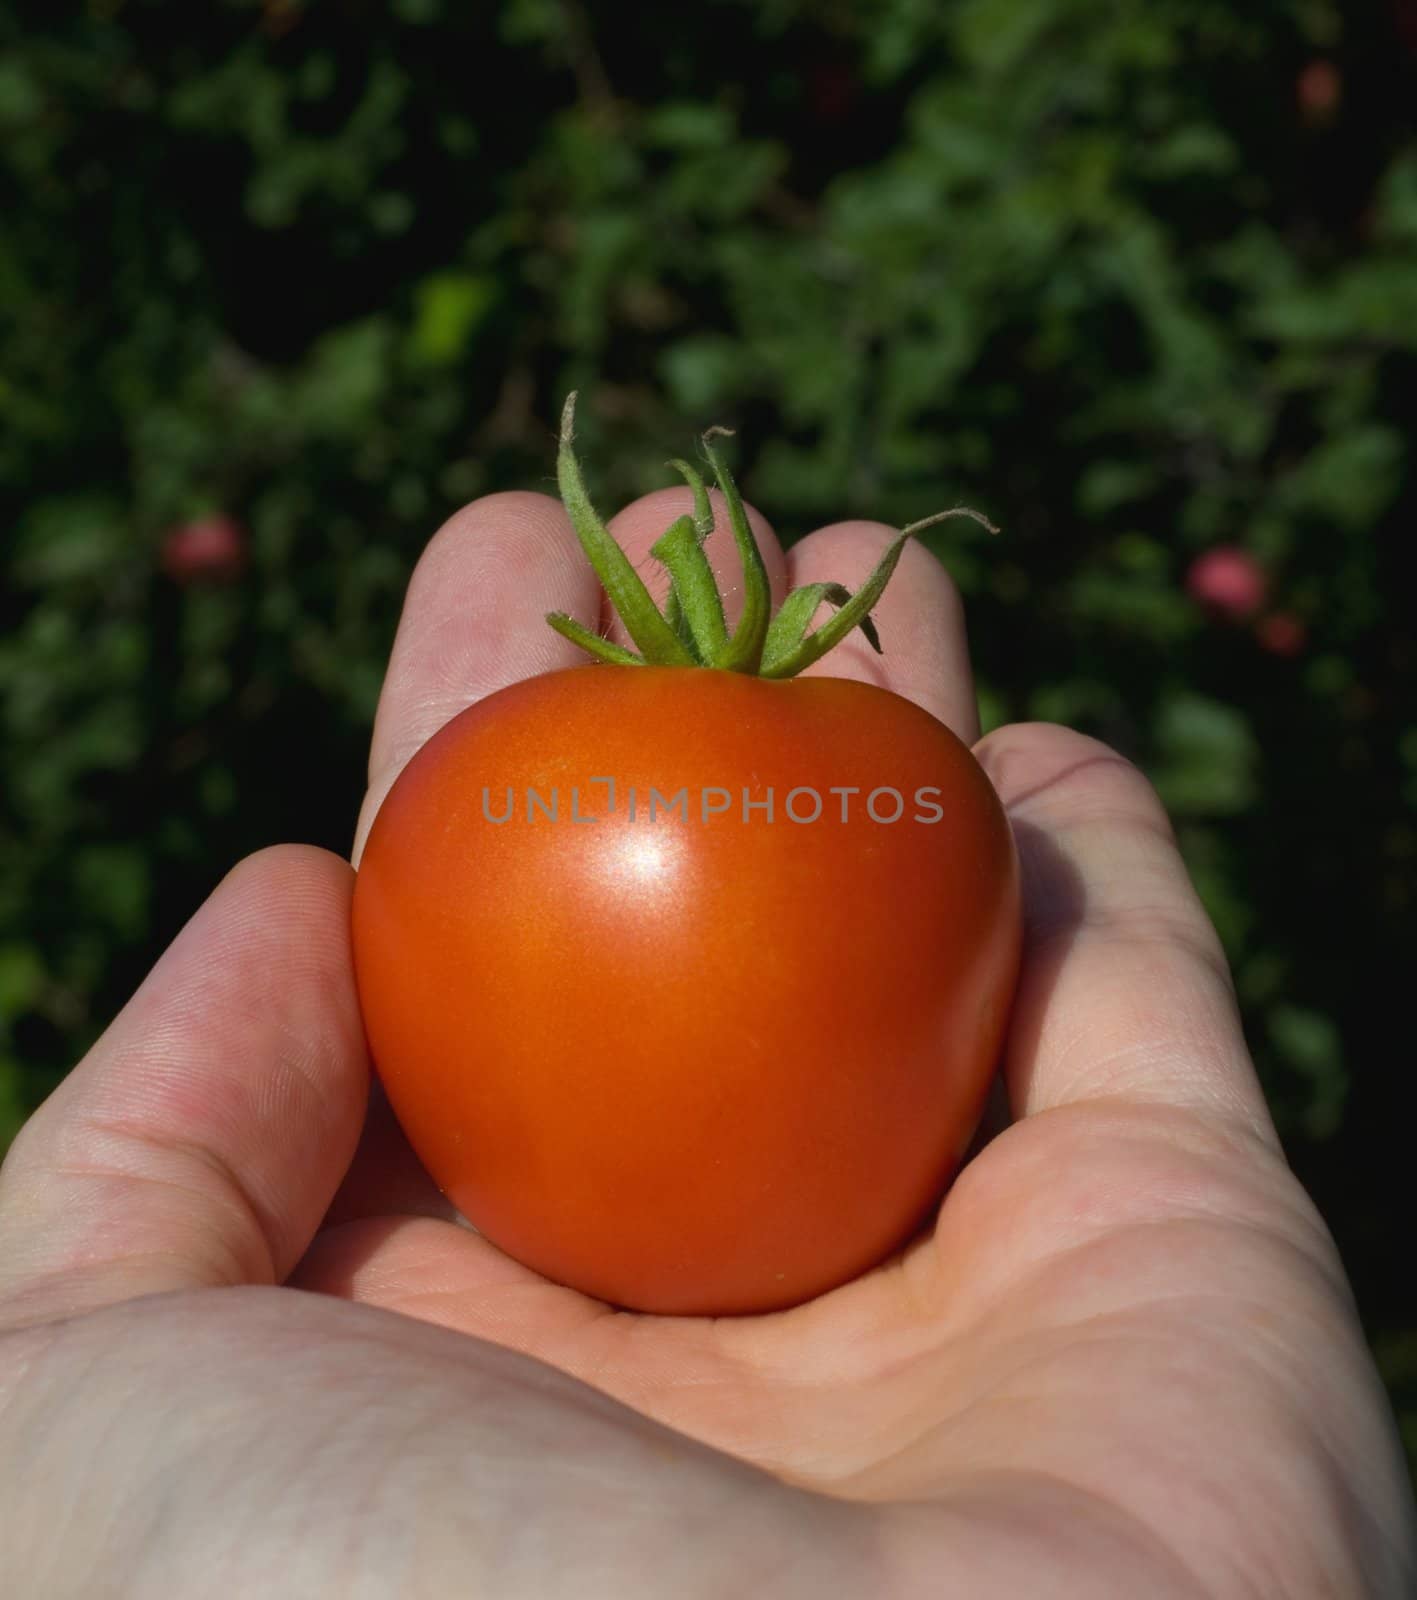 tomato of a summer crop on a palm of the gardener